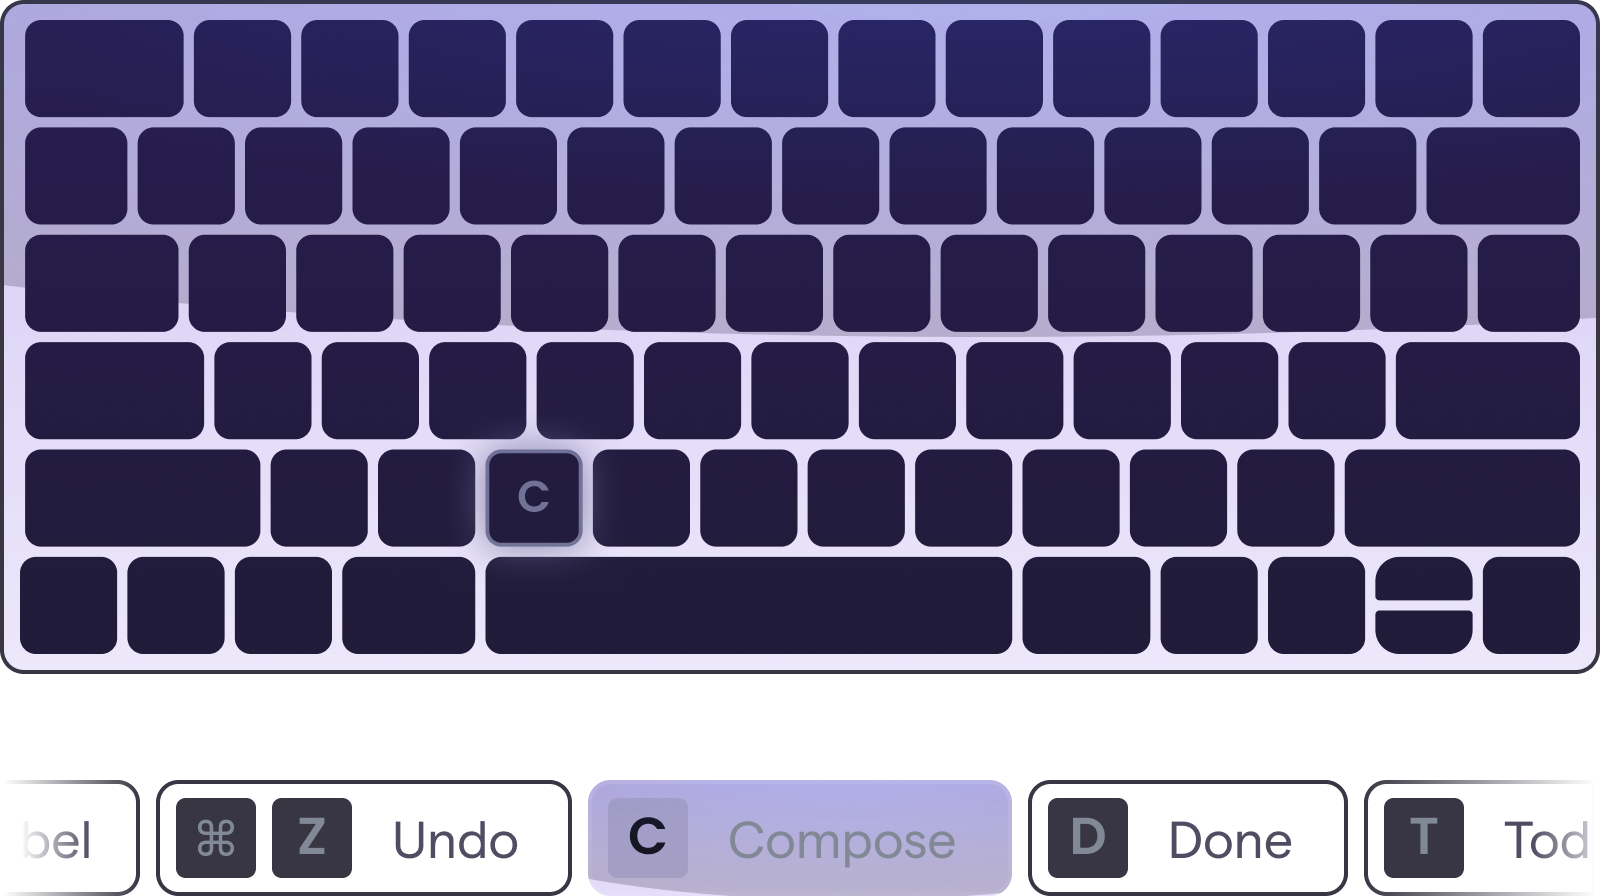 Keyboard silhouette with sample shortcuts underneath